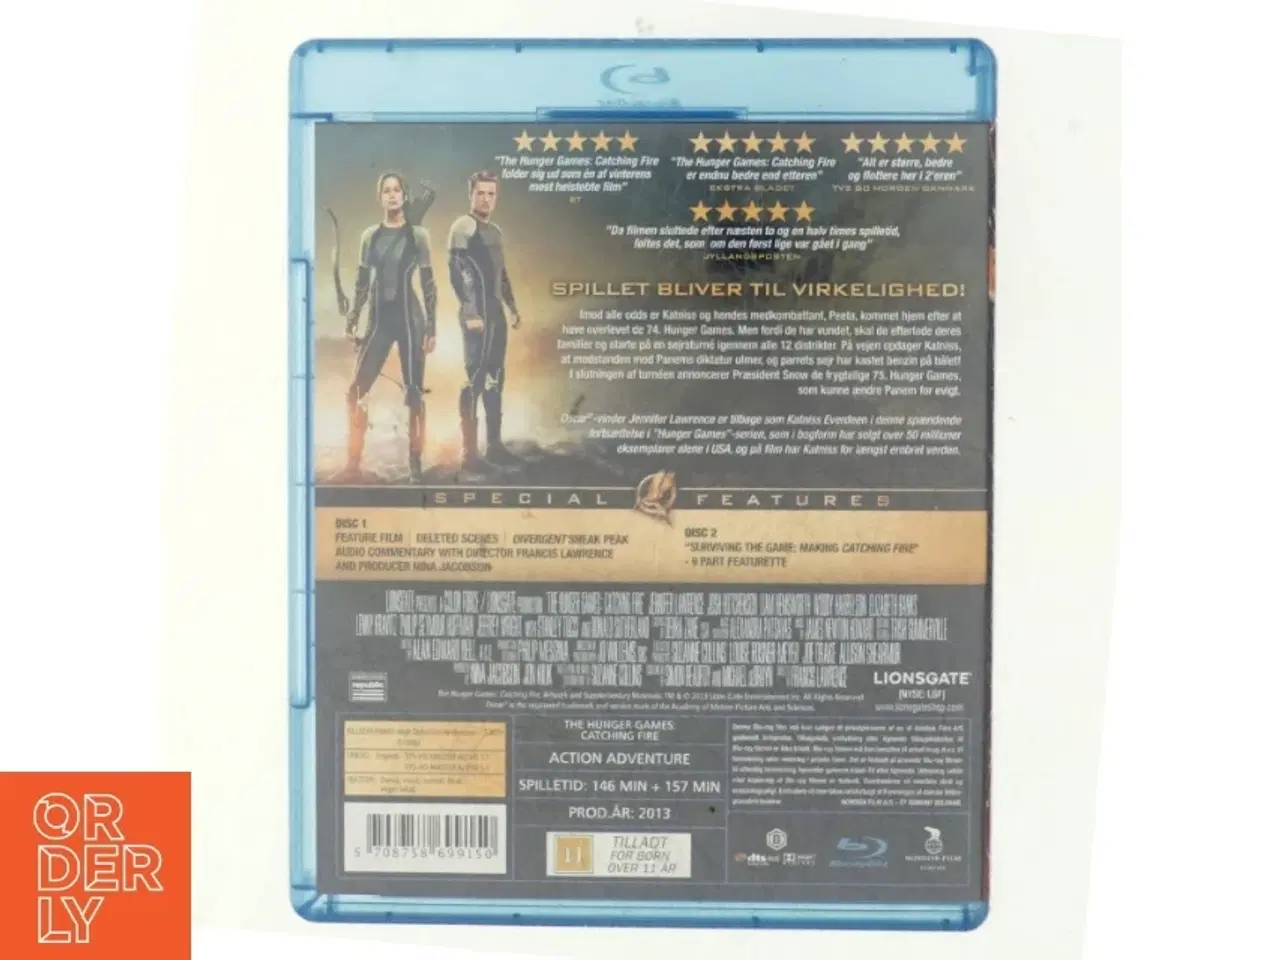 Billede 3 - The Hunger Games - Cathing fire (Blu-ray)